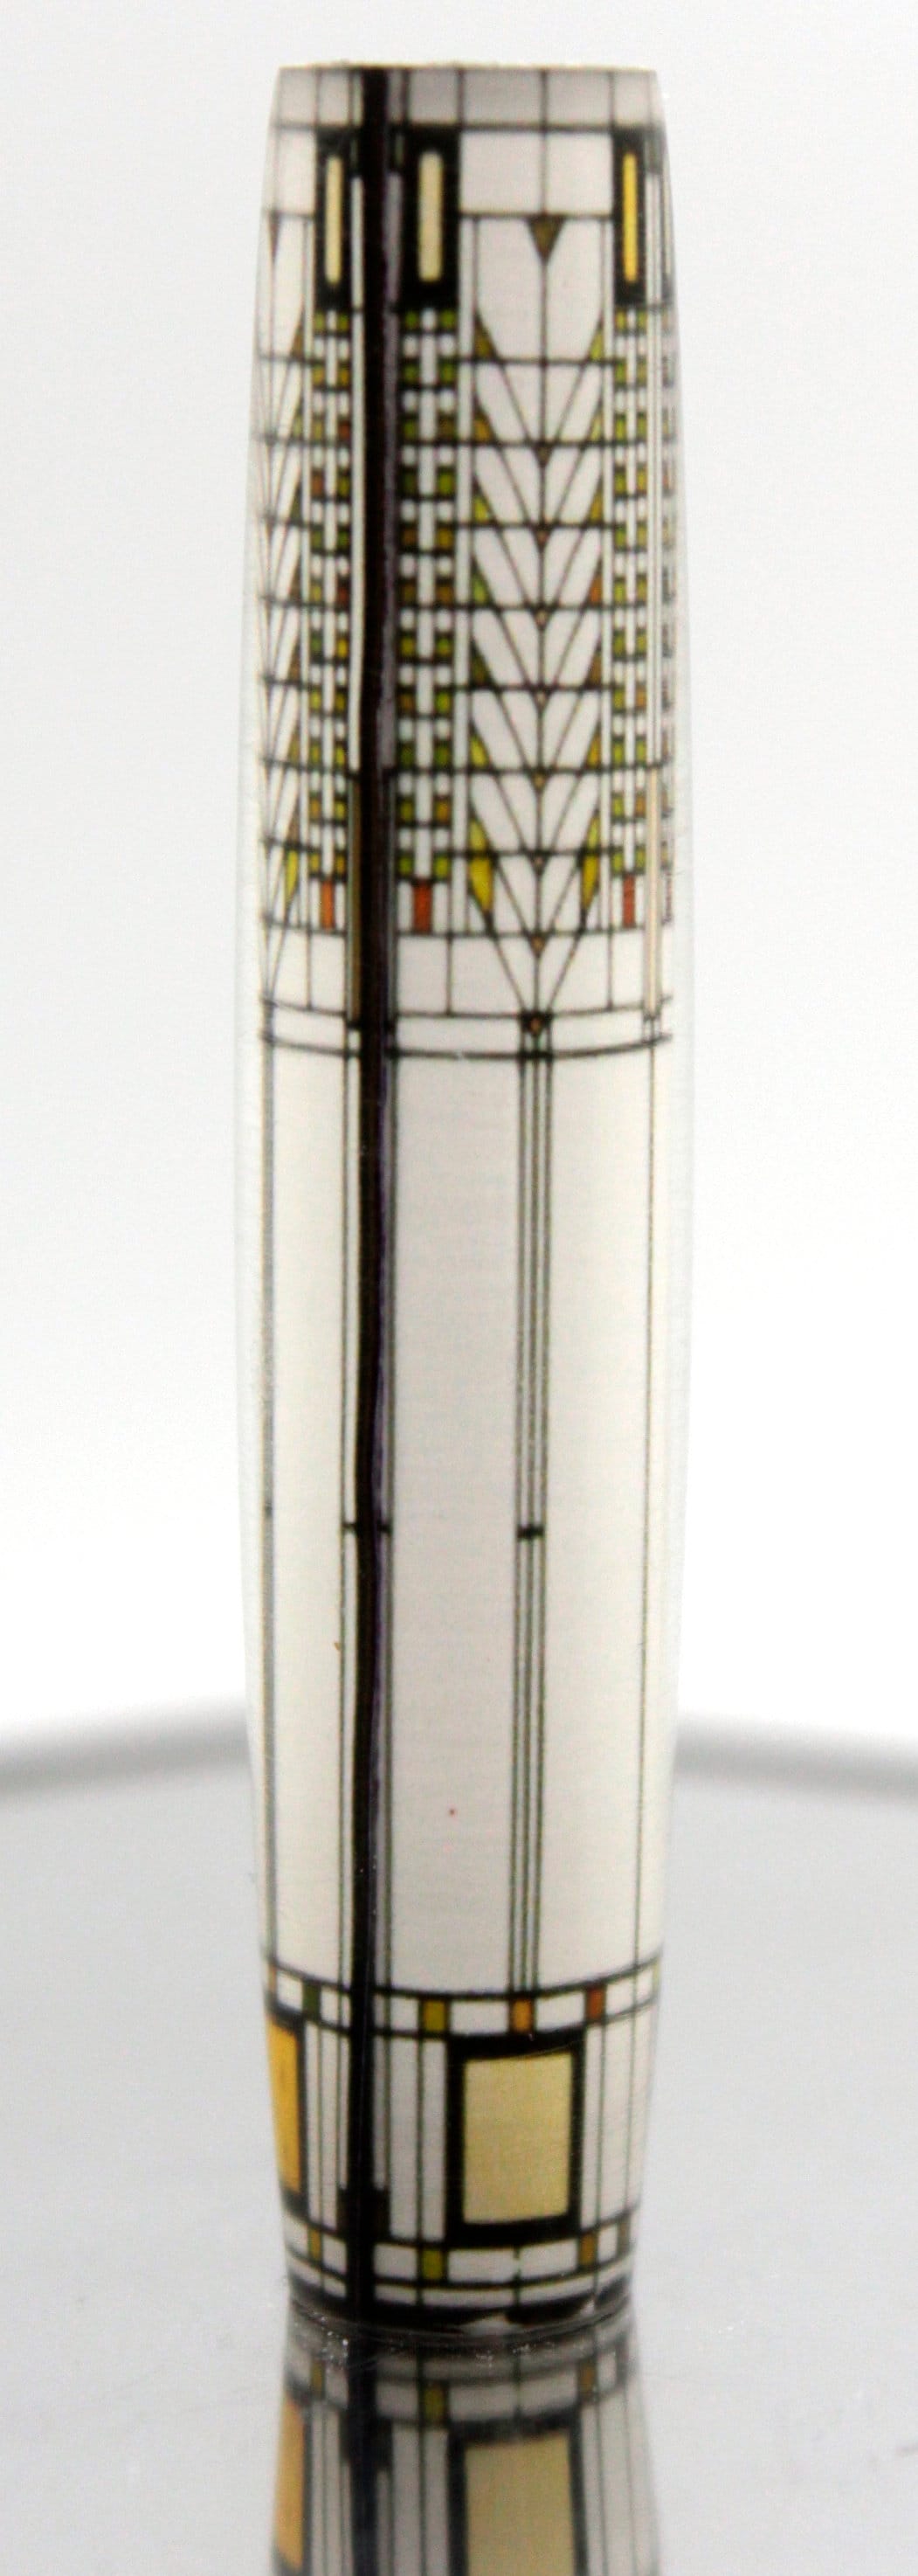 Frank Lloyd Wright - Tree of Life Stained Glass from Darwin D. Martin House Resin Cast Pen Blank for the Editor Pen Kit